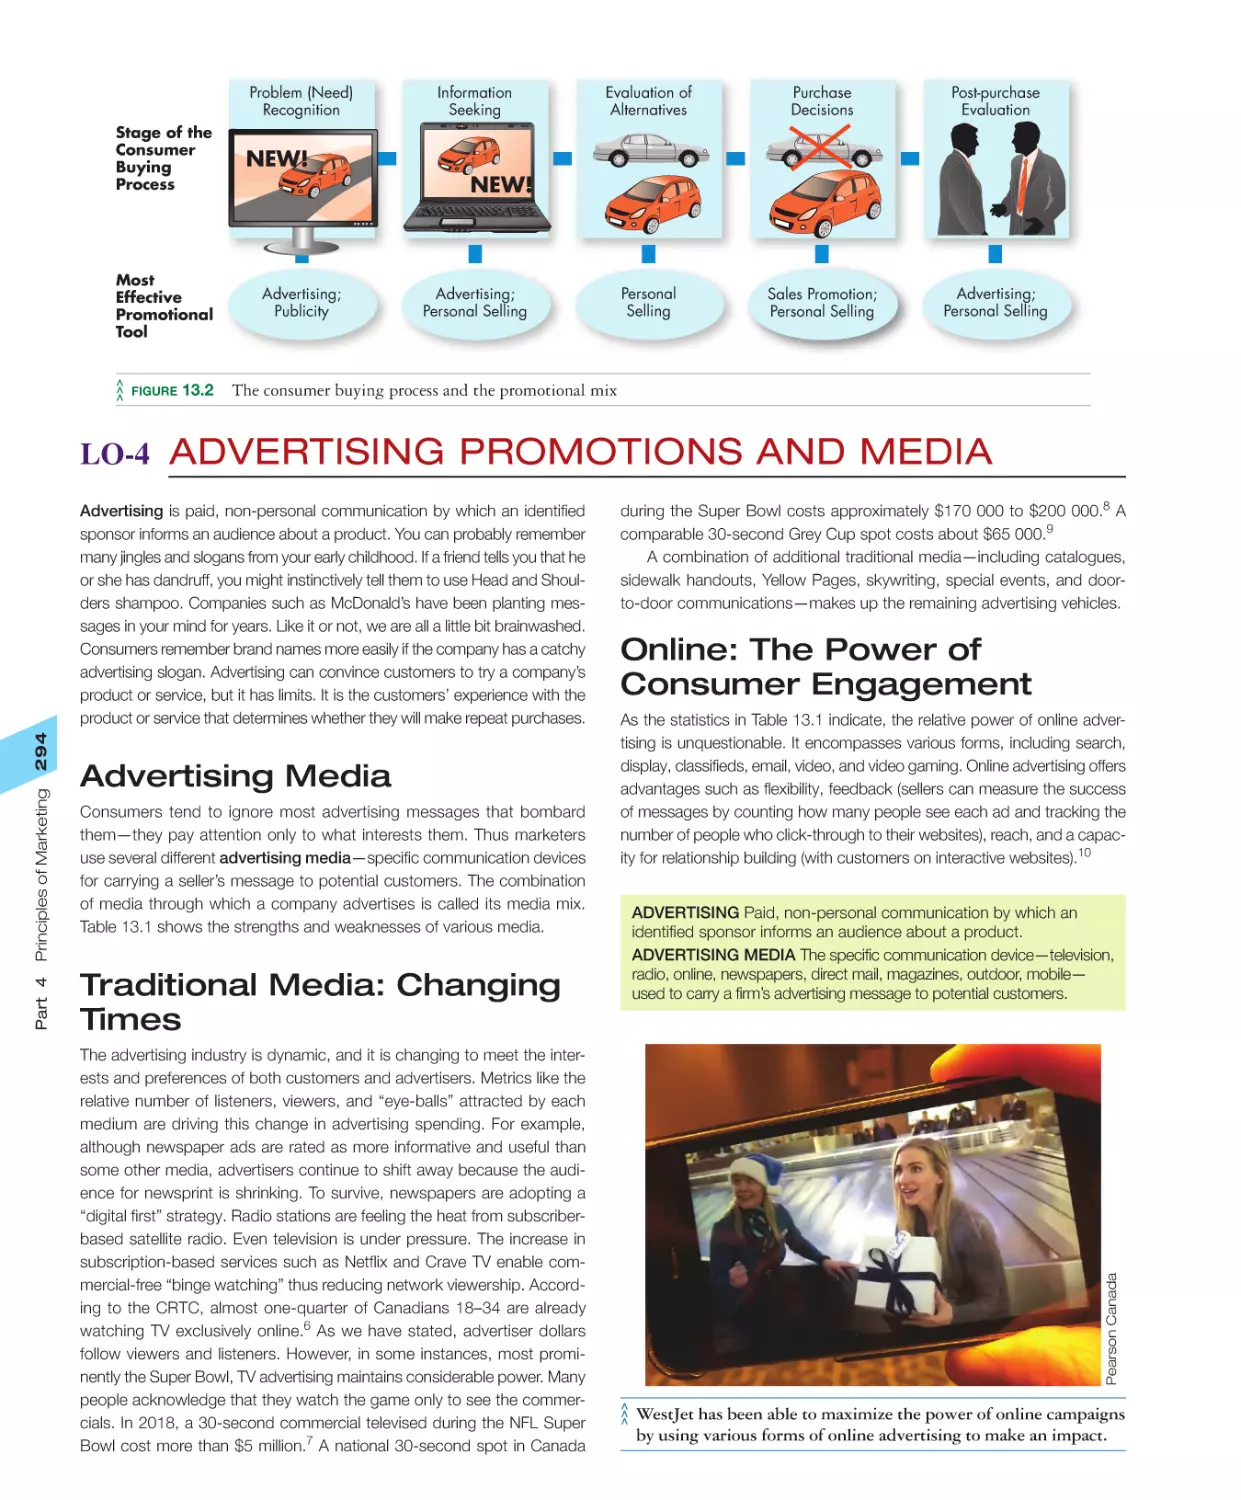 LO‐4 Advertising Promotions and Media
Traditional Media: Changing Times
Online: The Power of Consumer Engagement